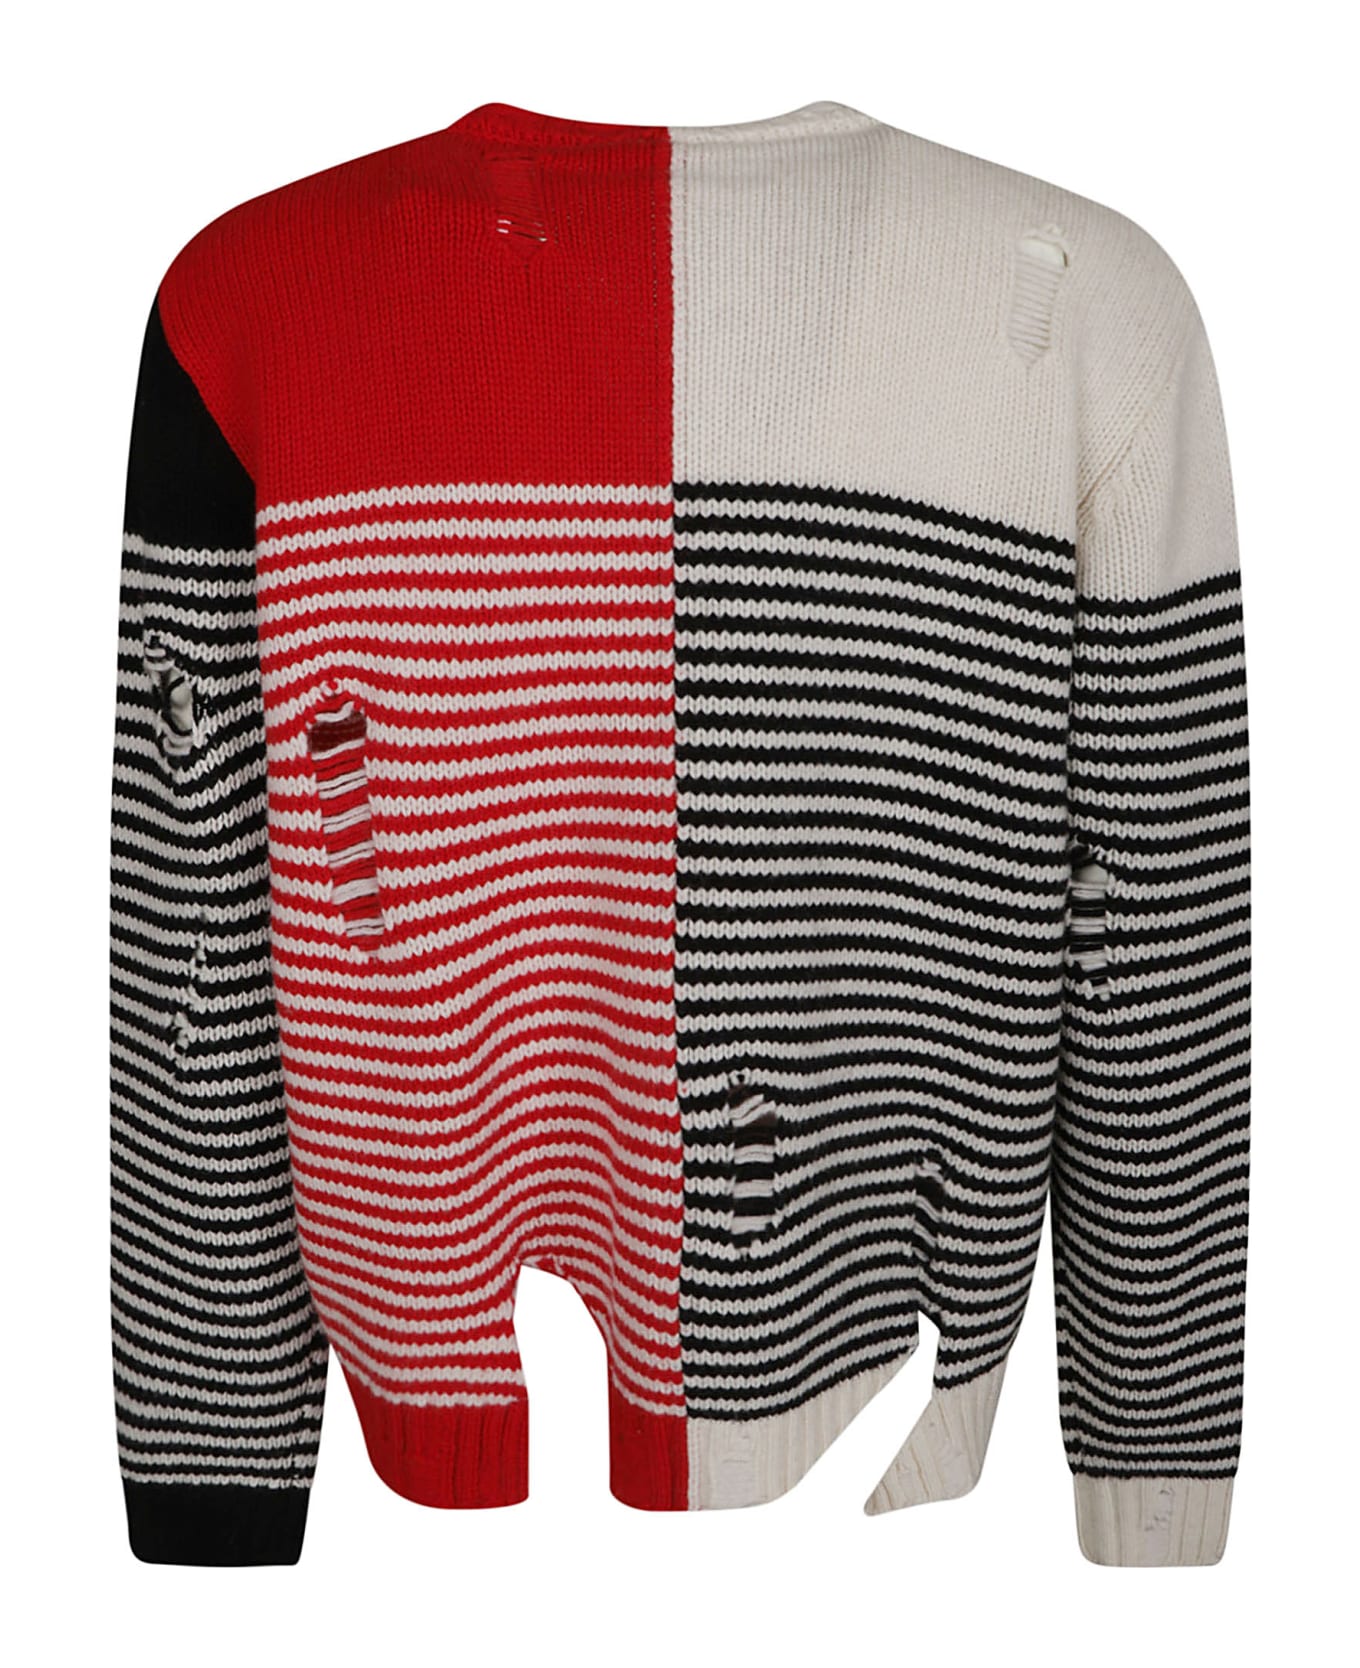 Charles Jeffrey Loverboy Destroyed Effect Stripe Knit Sweater - Multicolor カーディガン